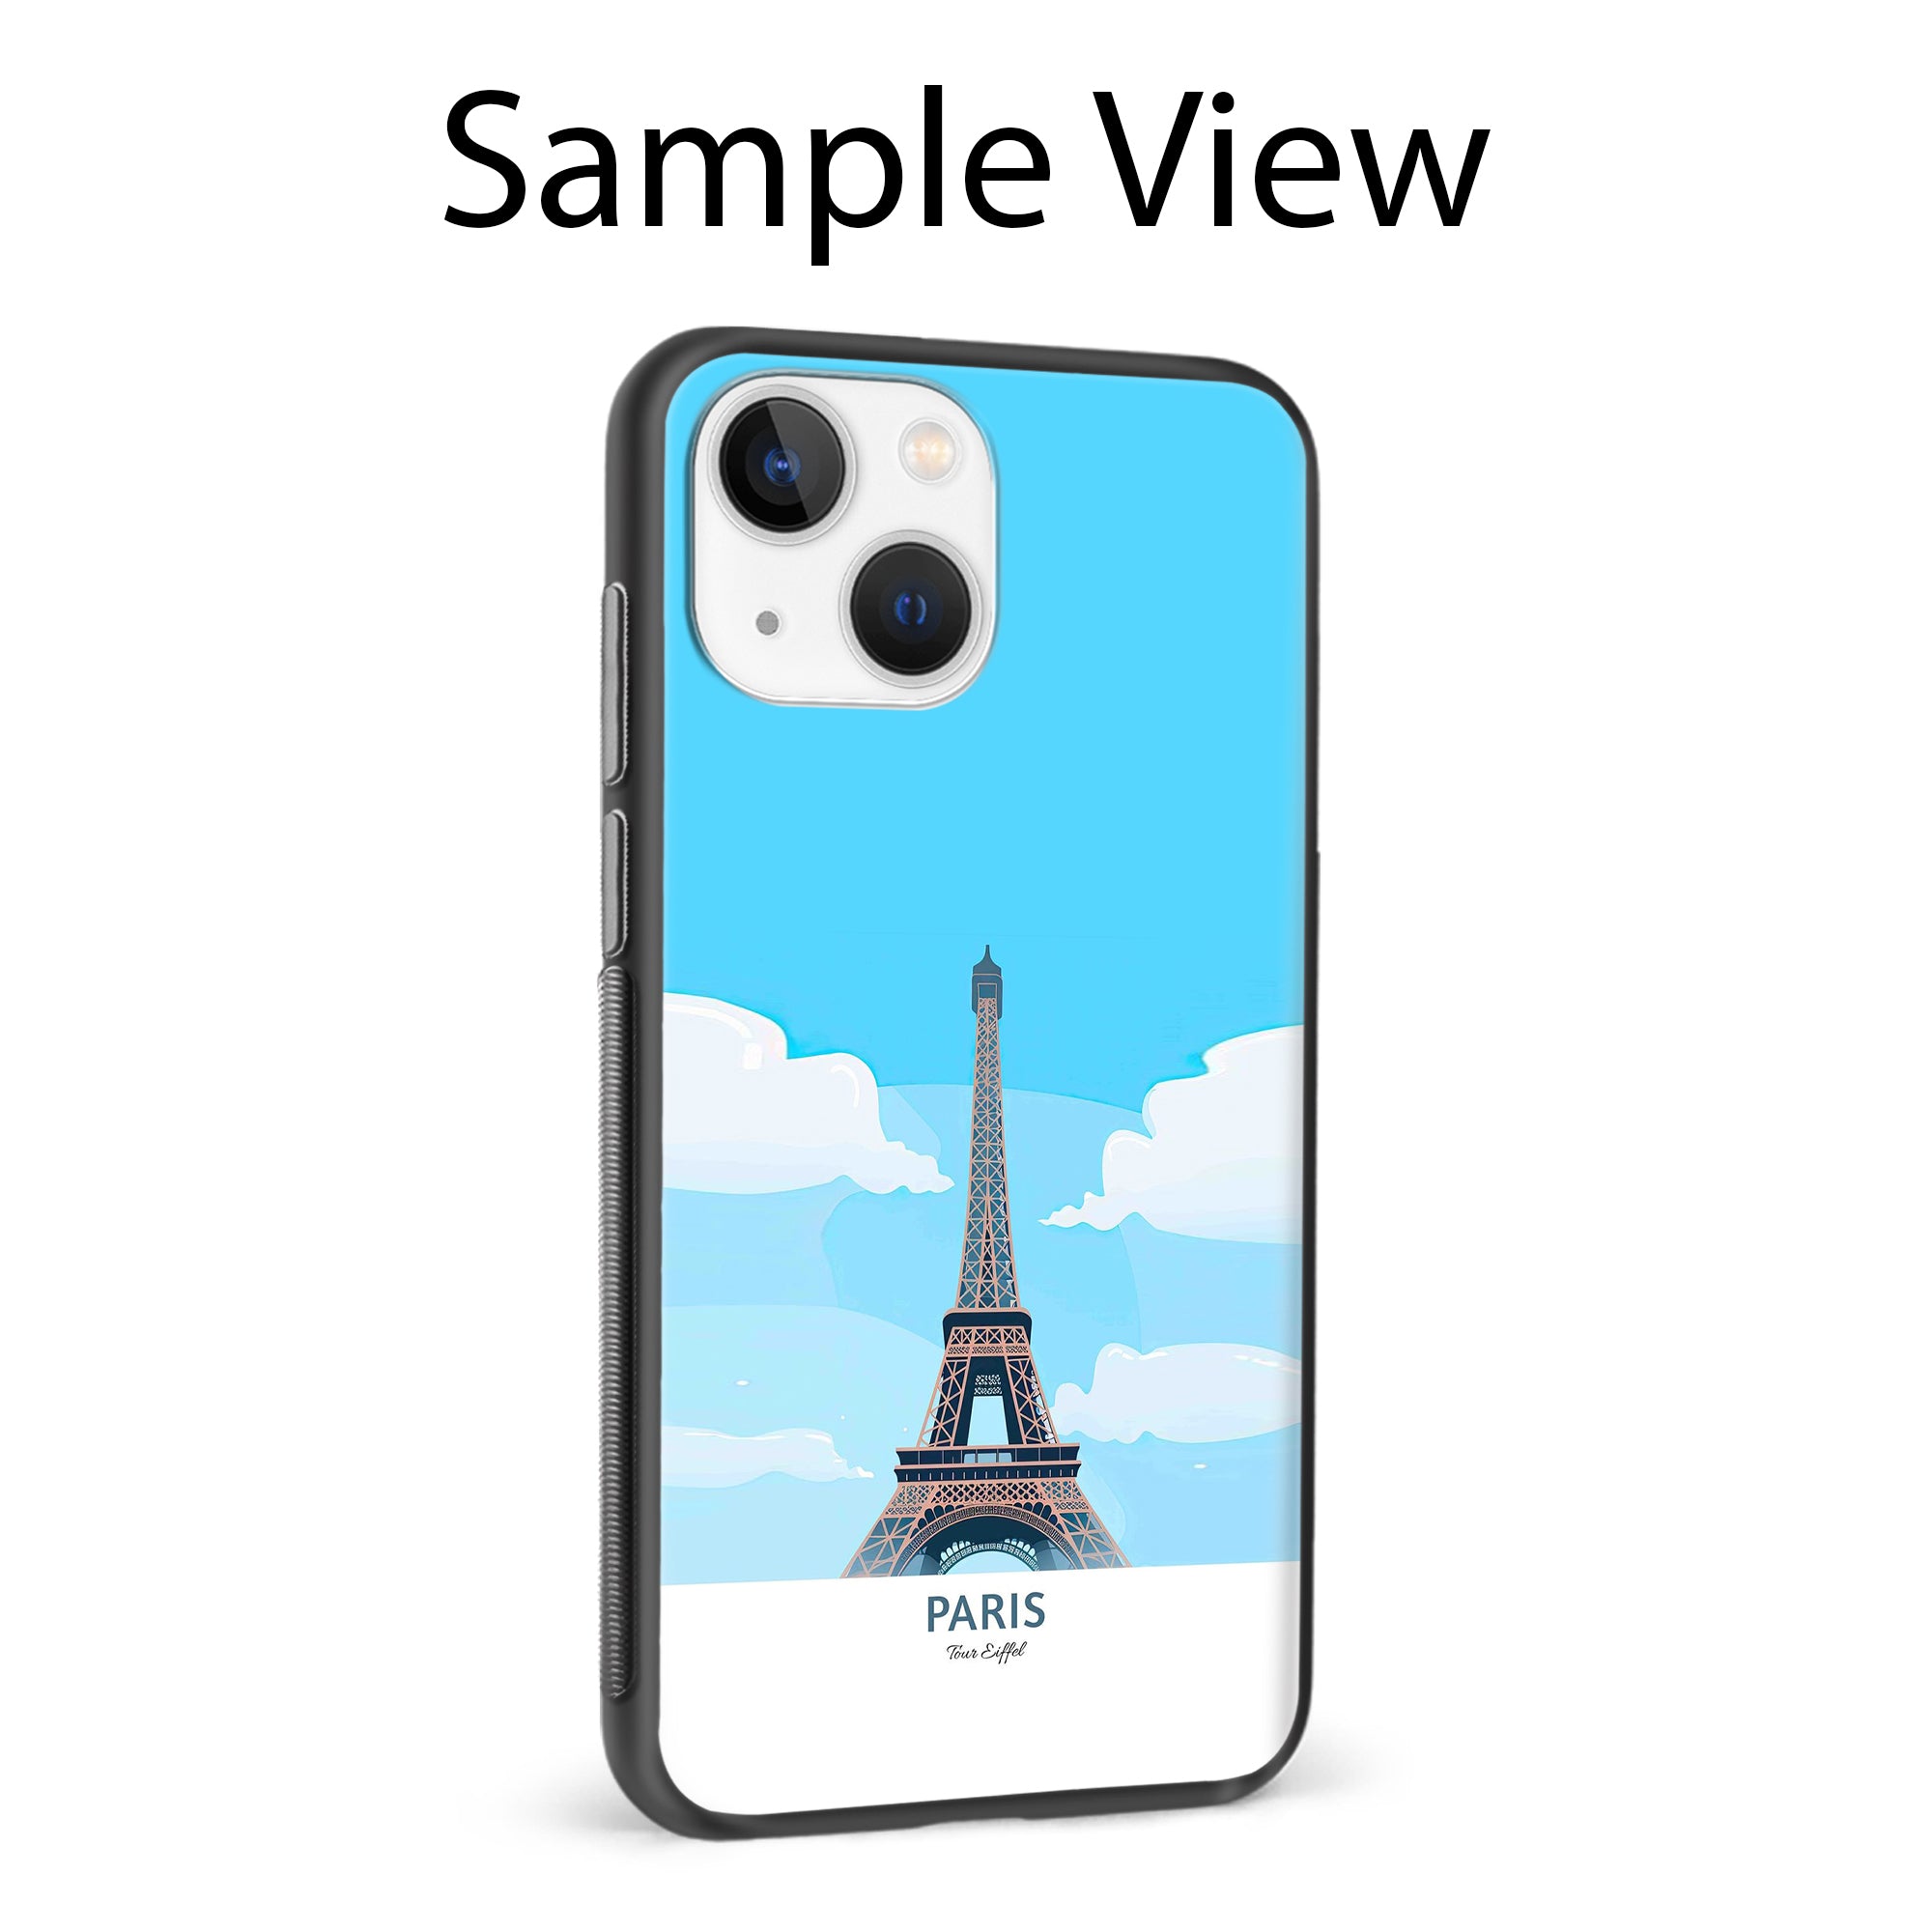 Buy Paris Metal-Silicon Back Mobile Phone Case/Cover For Samsung Galaxy A50 / A50s / A30s Online